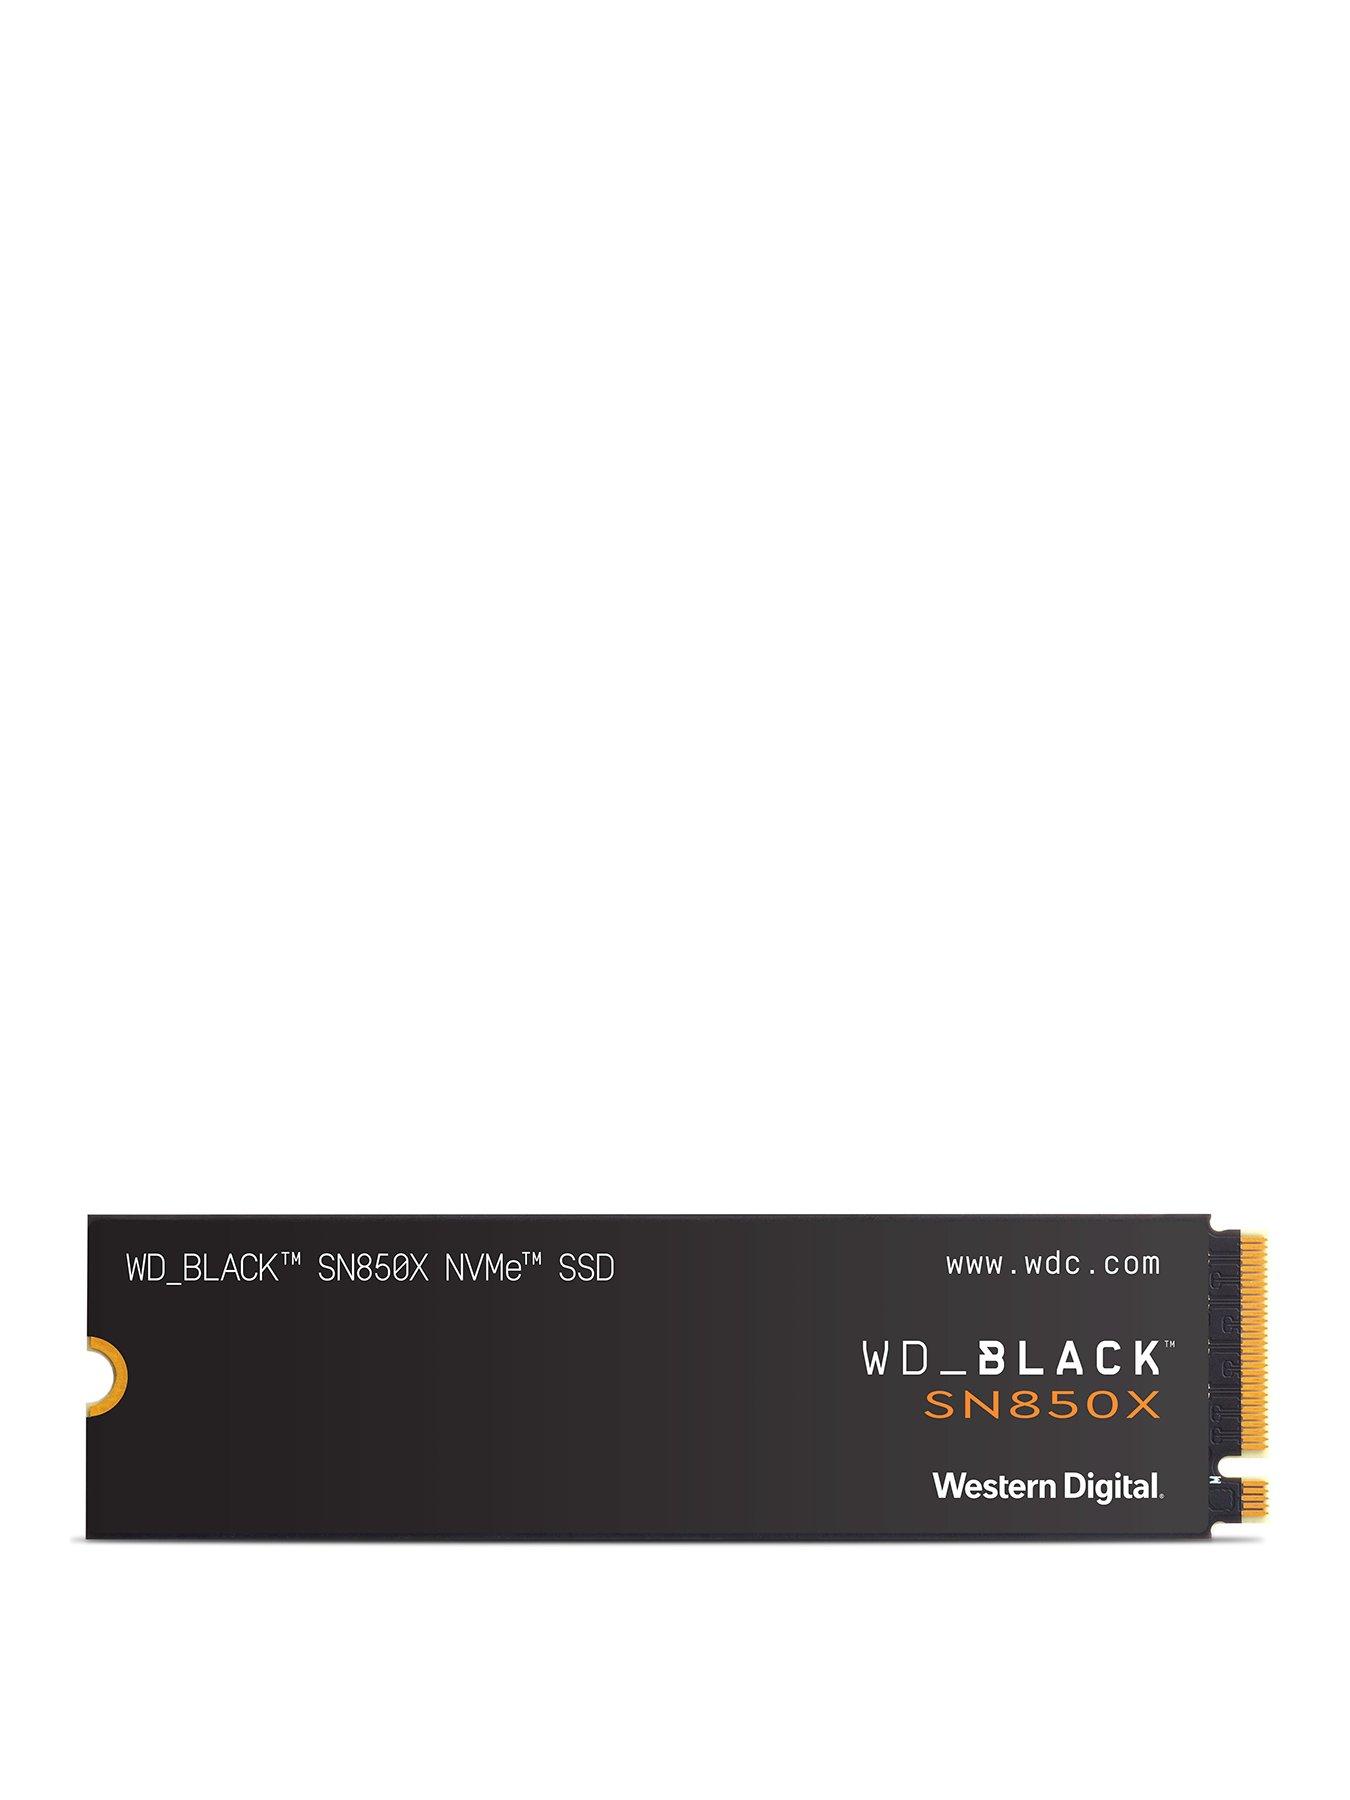 WD Black SN850X SSD Review: Fast, fancy, and premium